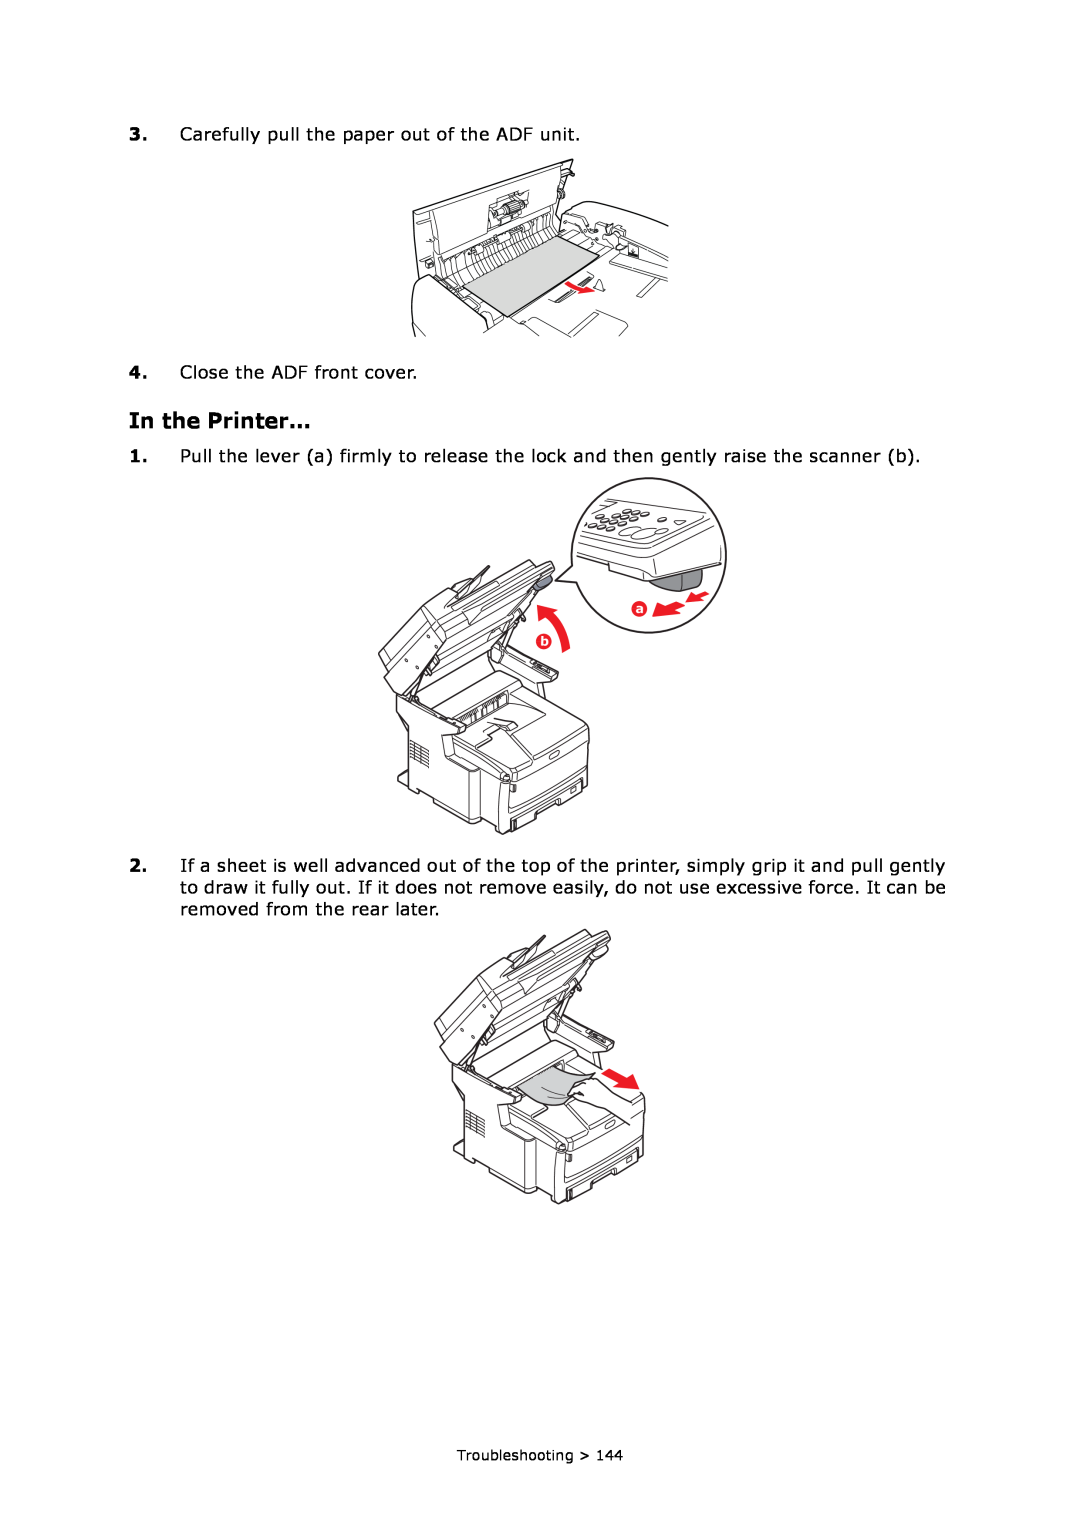 Oki MC860n MFP manual In the Printer, Carefully pull the paper out of the ADF unit, Close the ADF front cover 